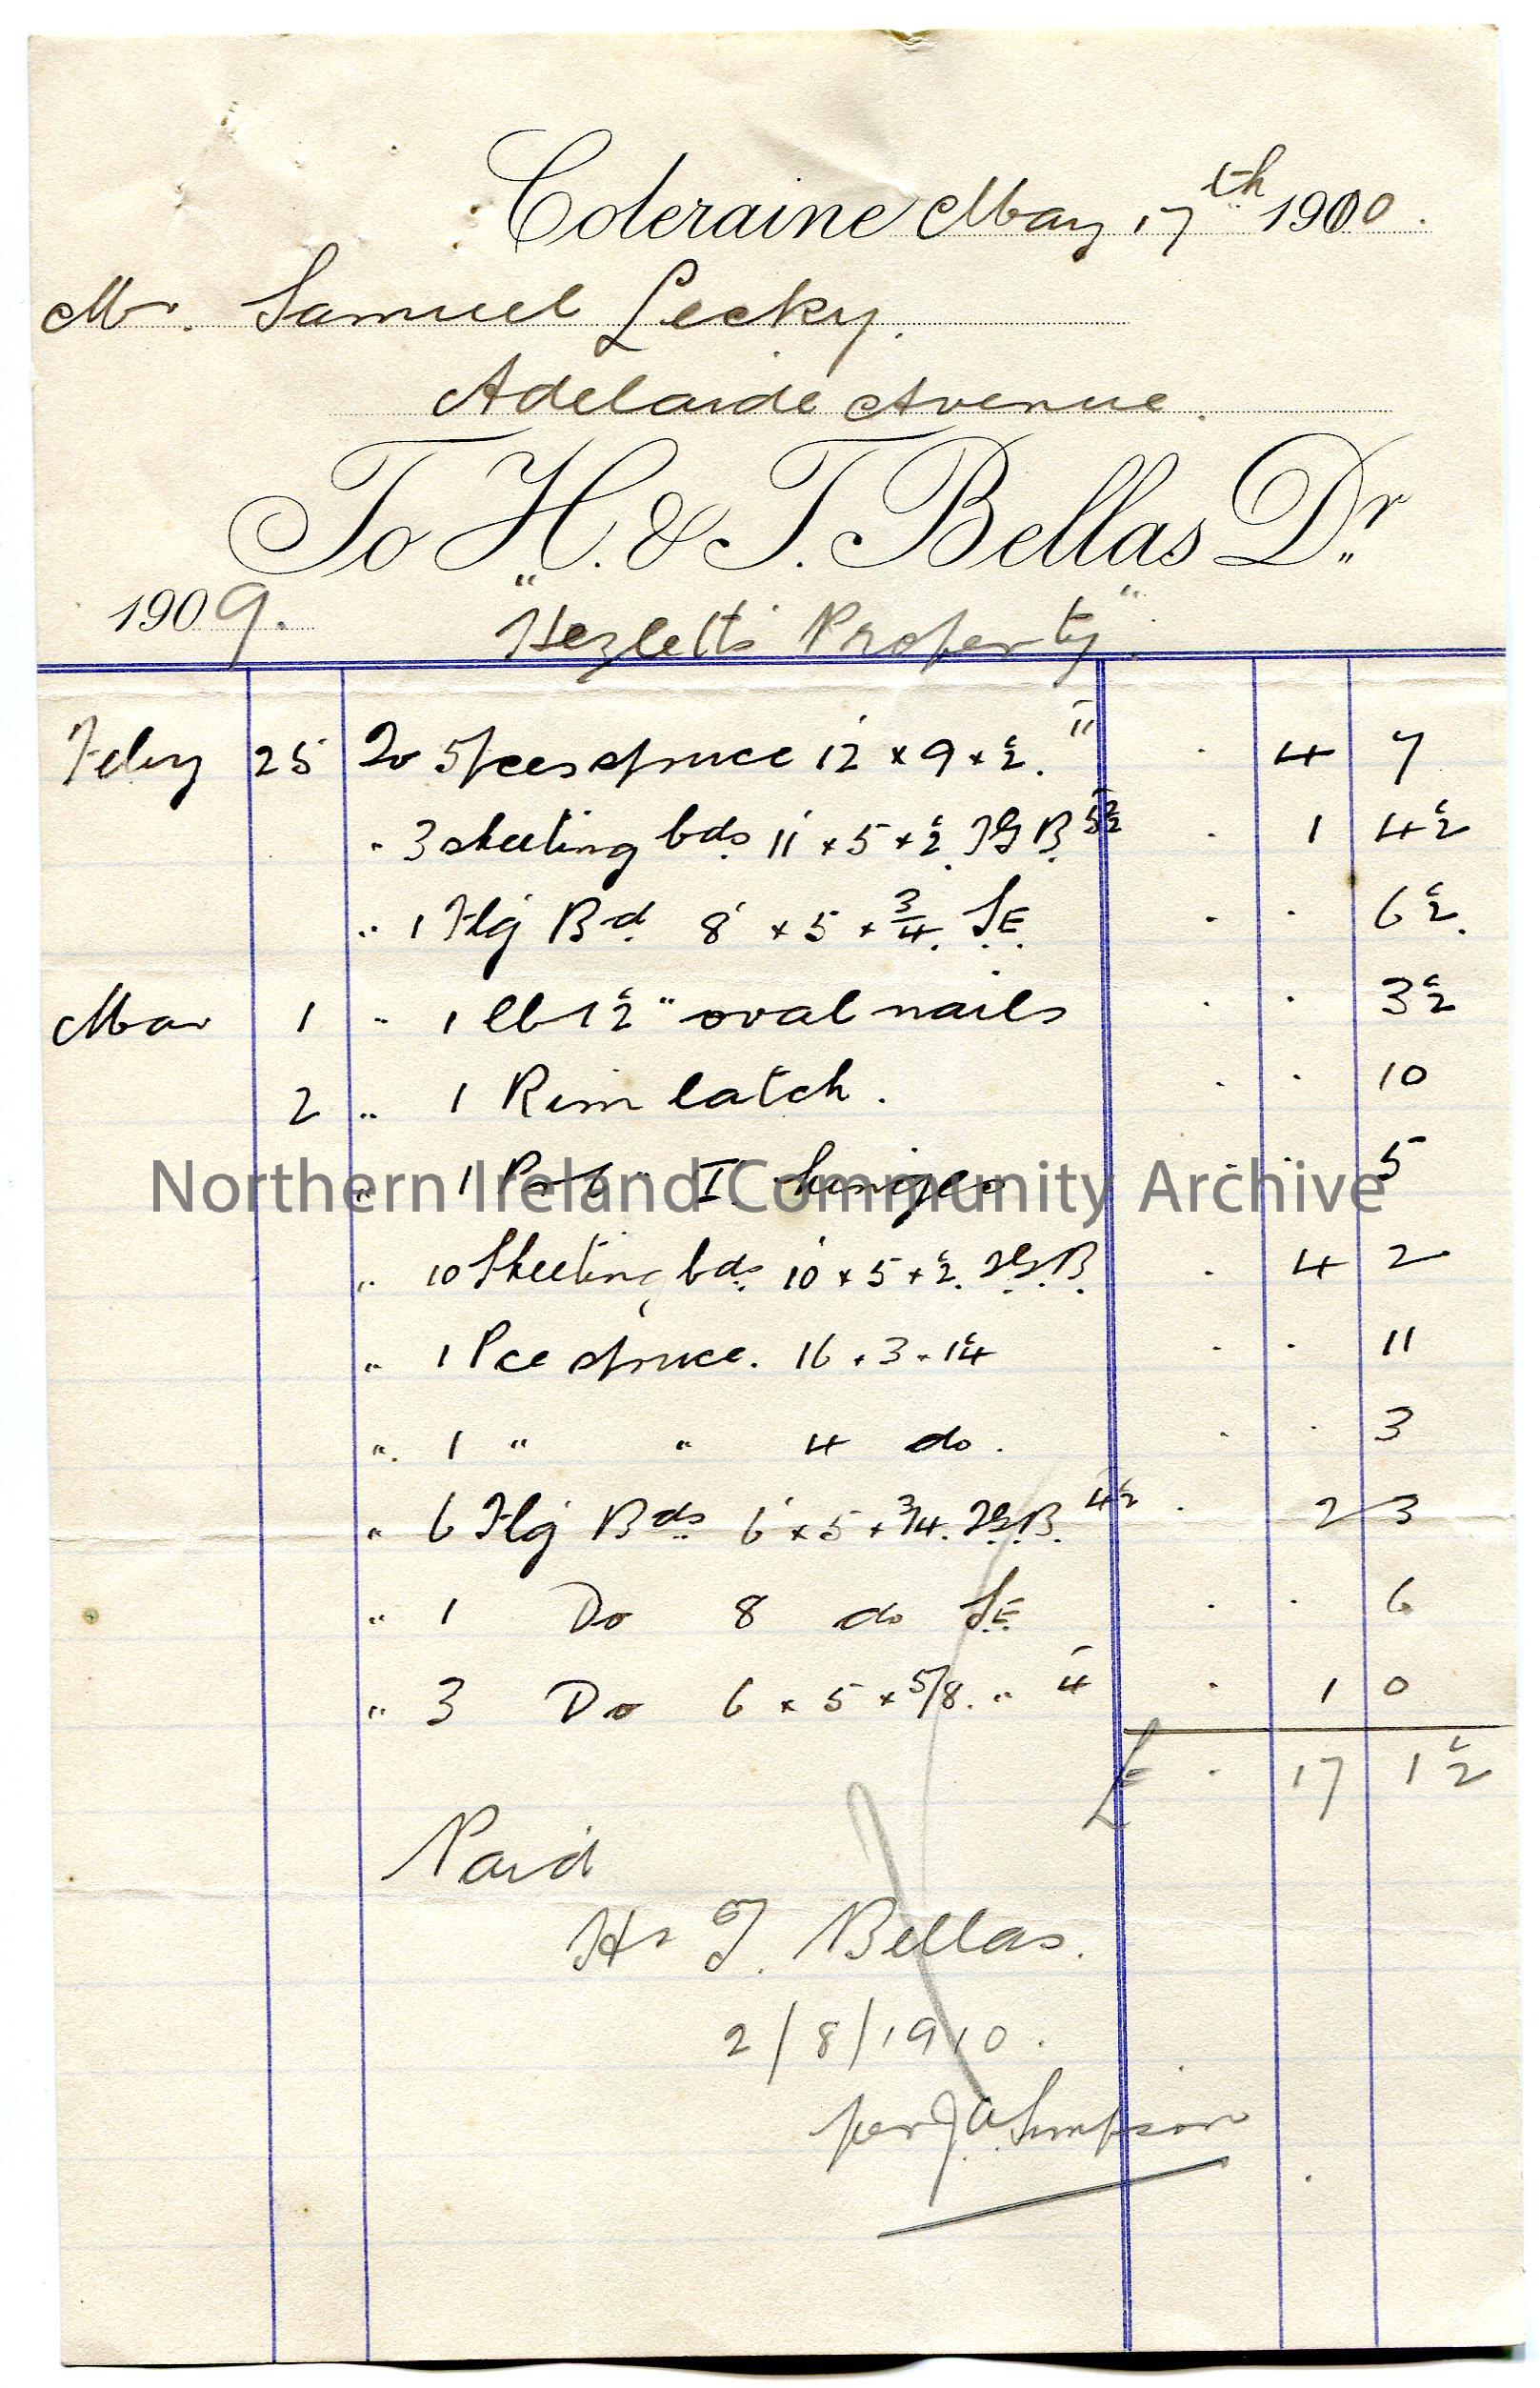 Handwritten receipt dated 17th May, 1910, for payment by Mr Samuel Lecky, Adelaide Avenue, to H & T Bellas, Coleraine, for sum of £0.17.1 1/2 for…